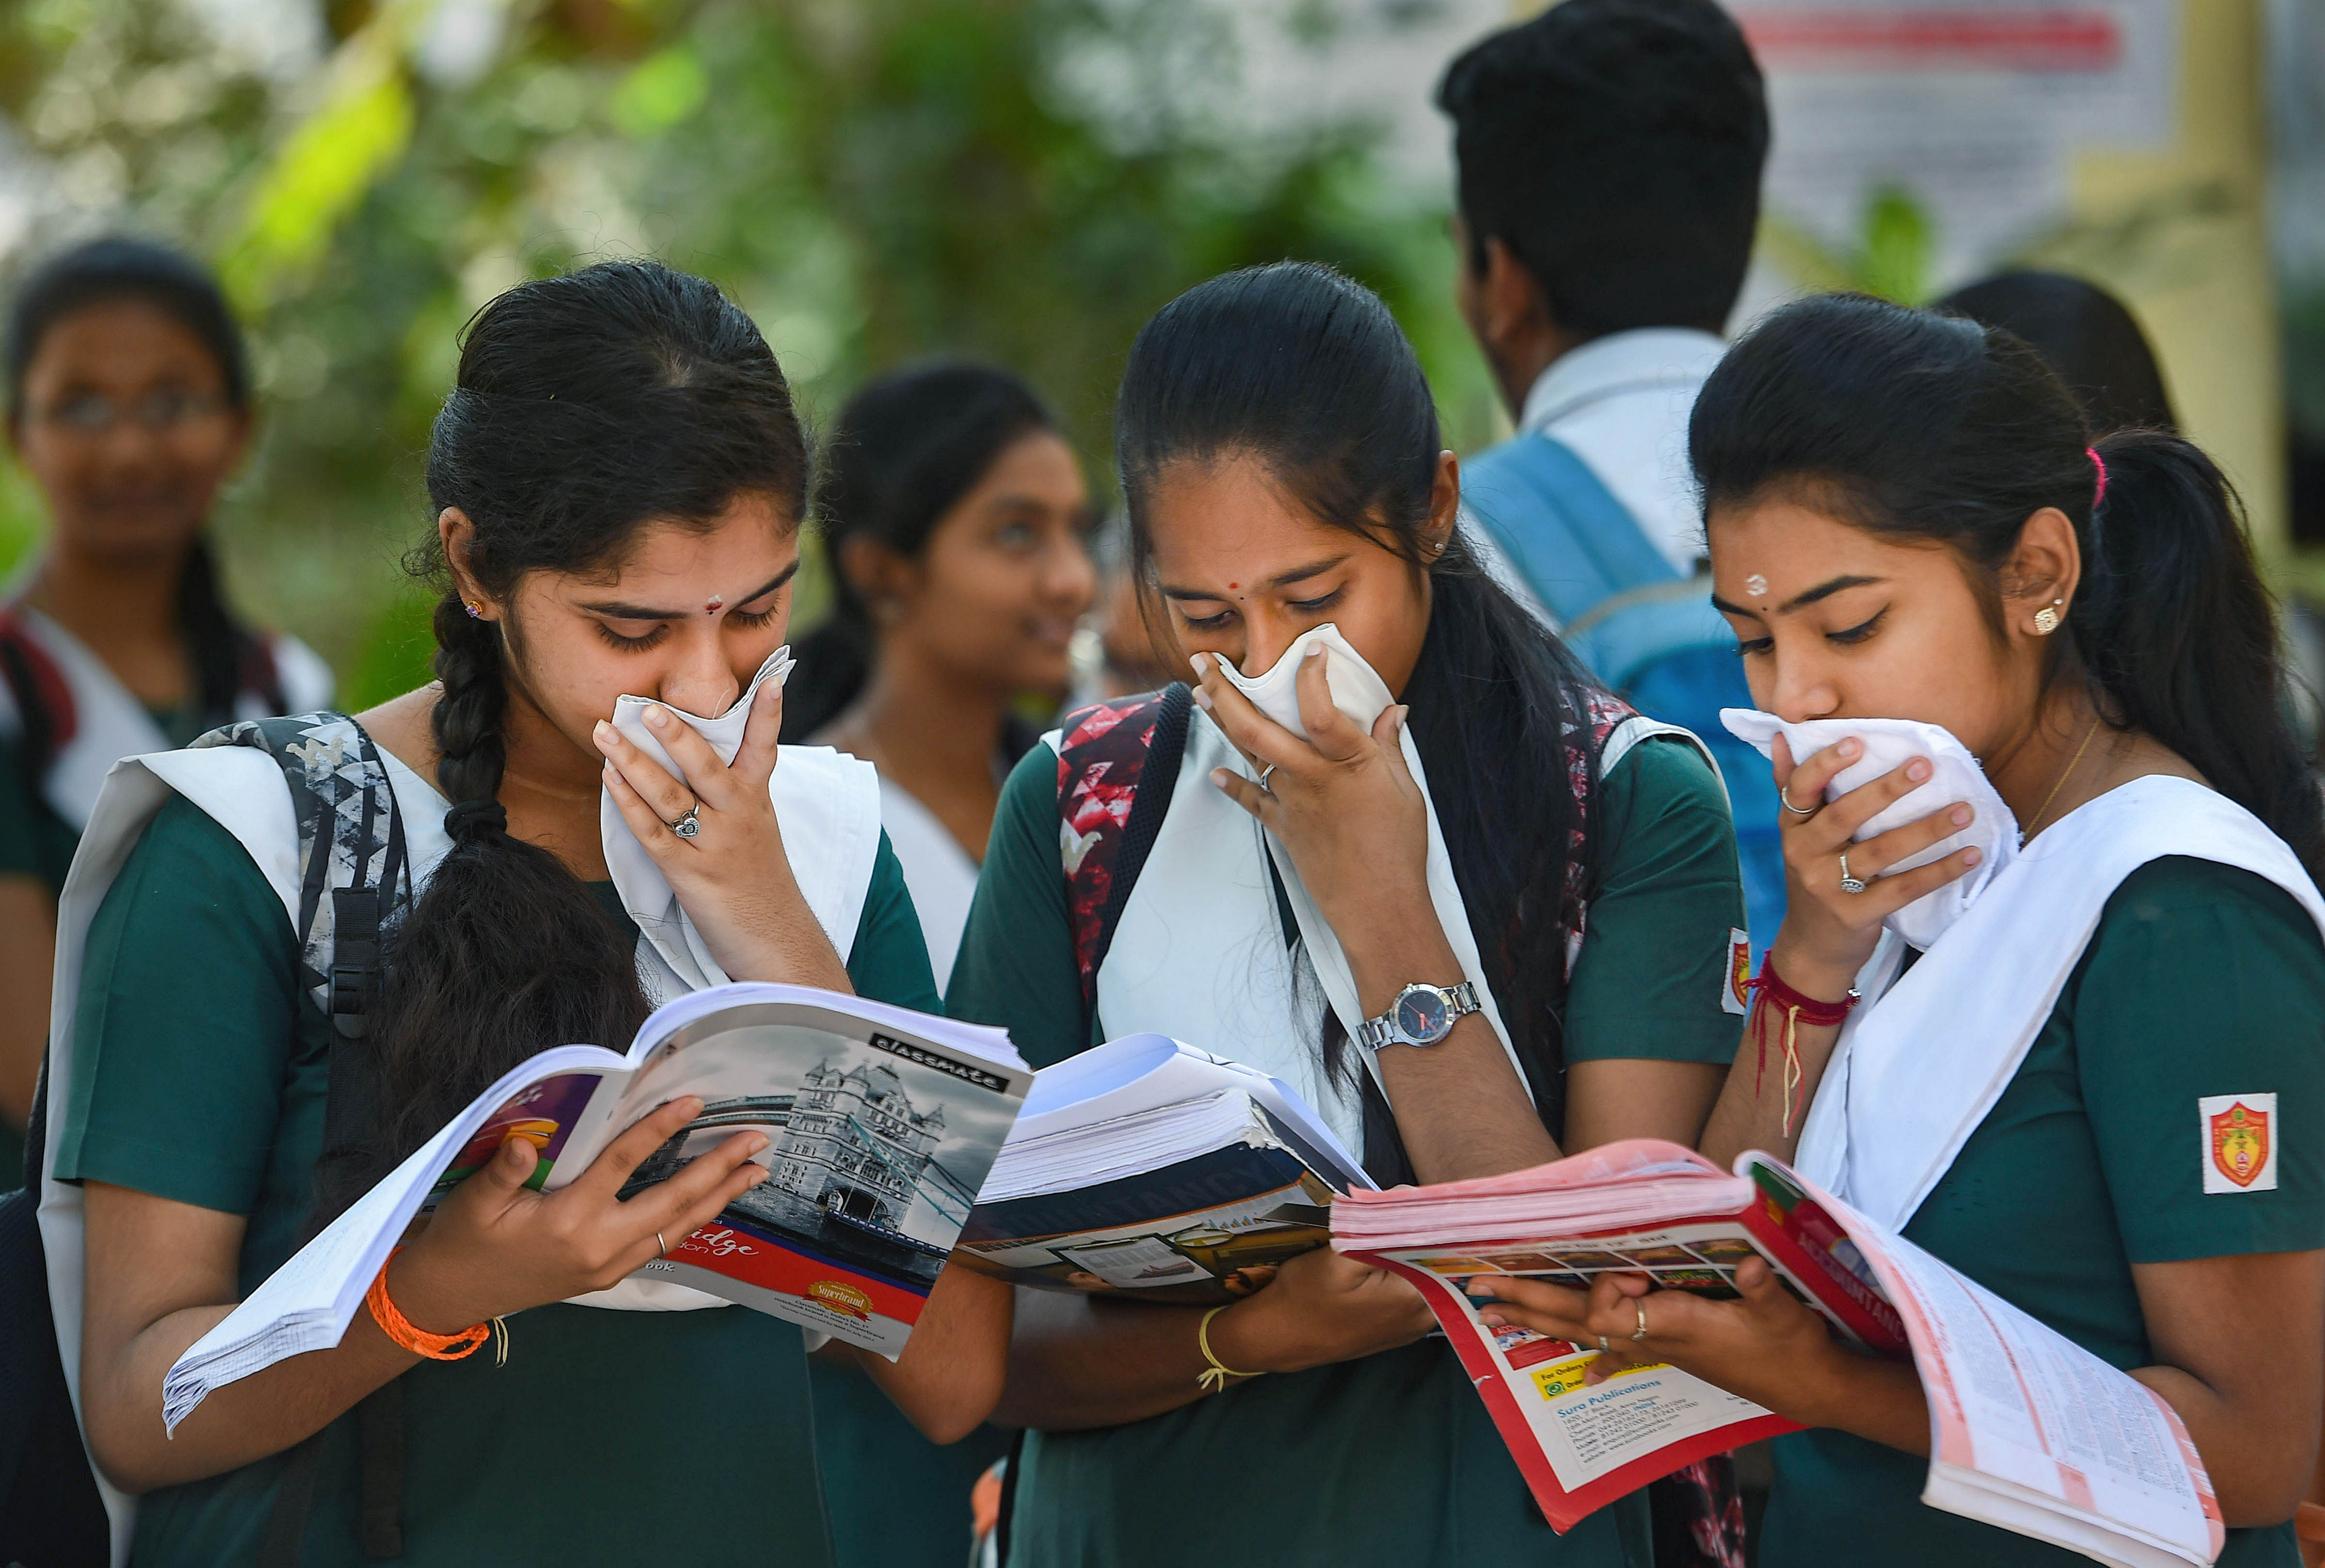 Chennai: Class 12 students, cover their faces to protect themselves from COVID-19. (Credit: PTI)